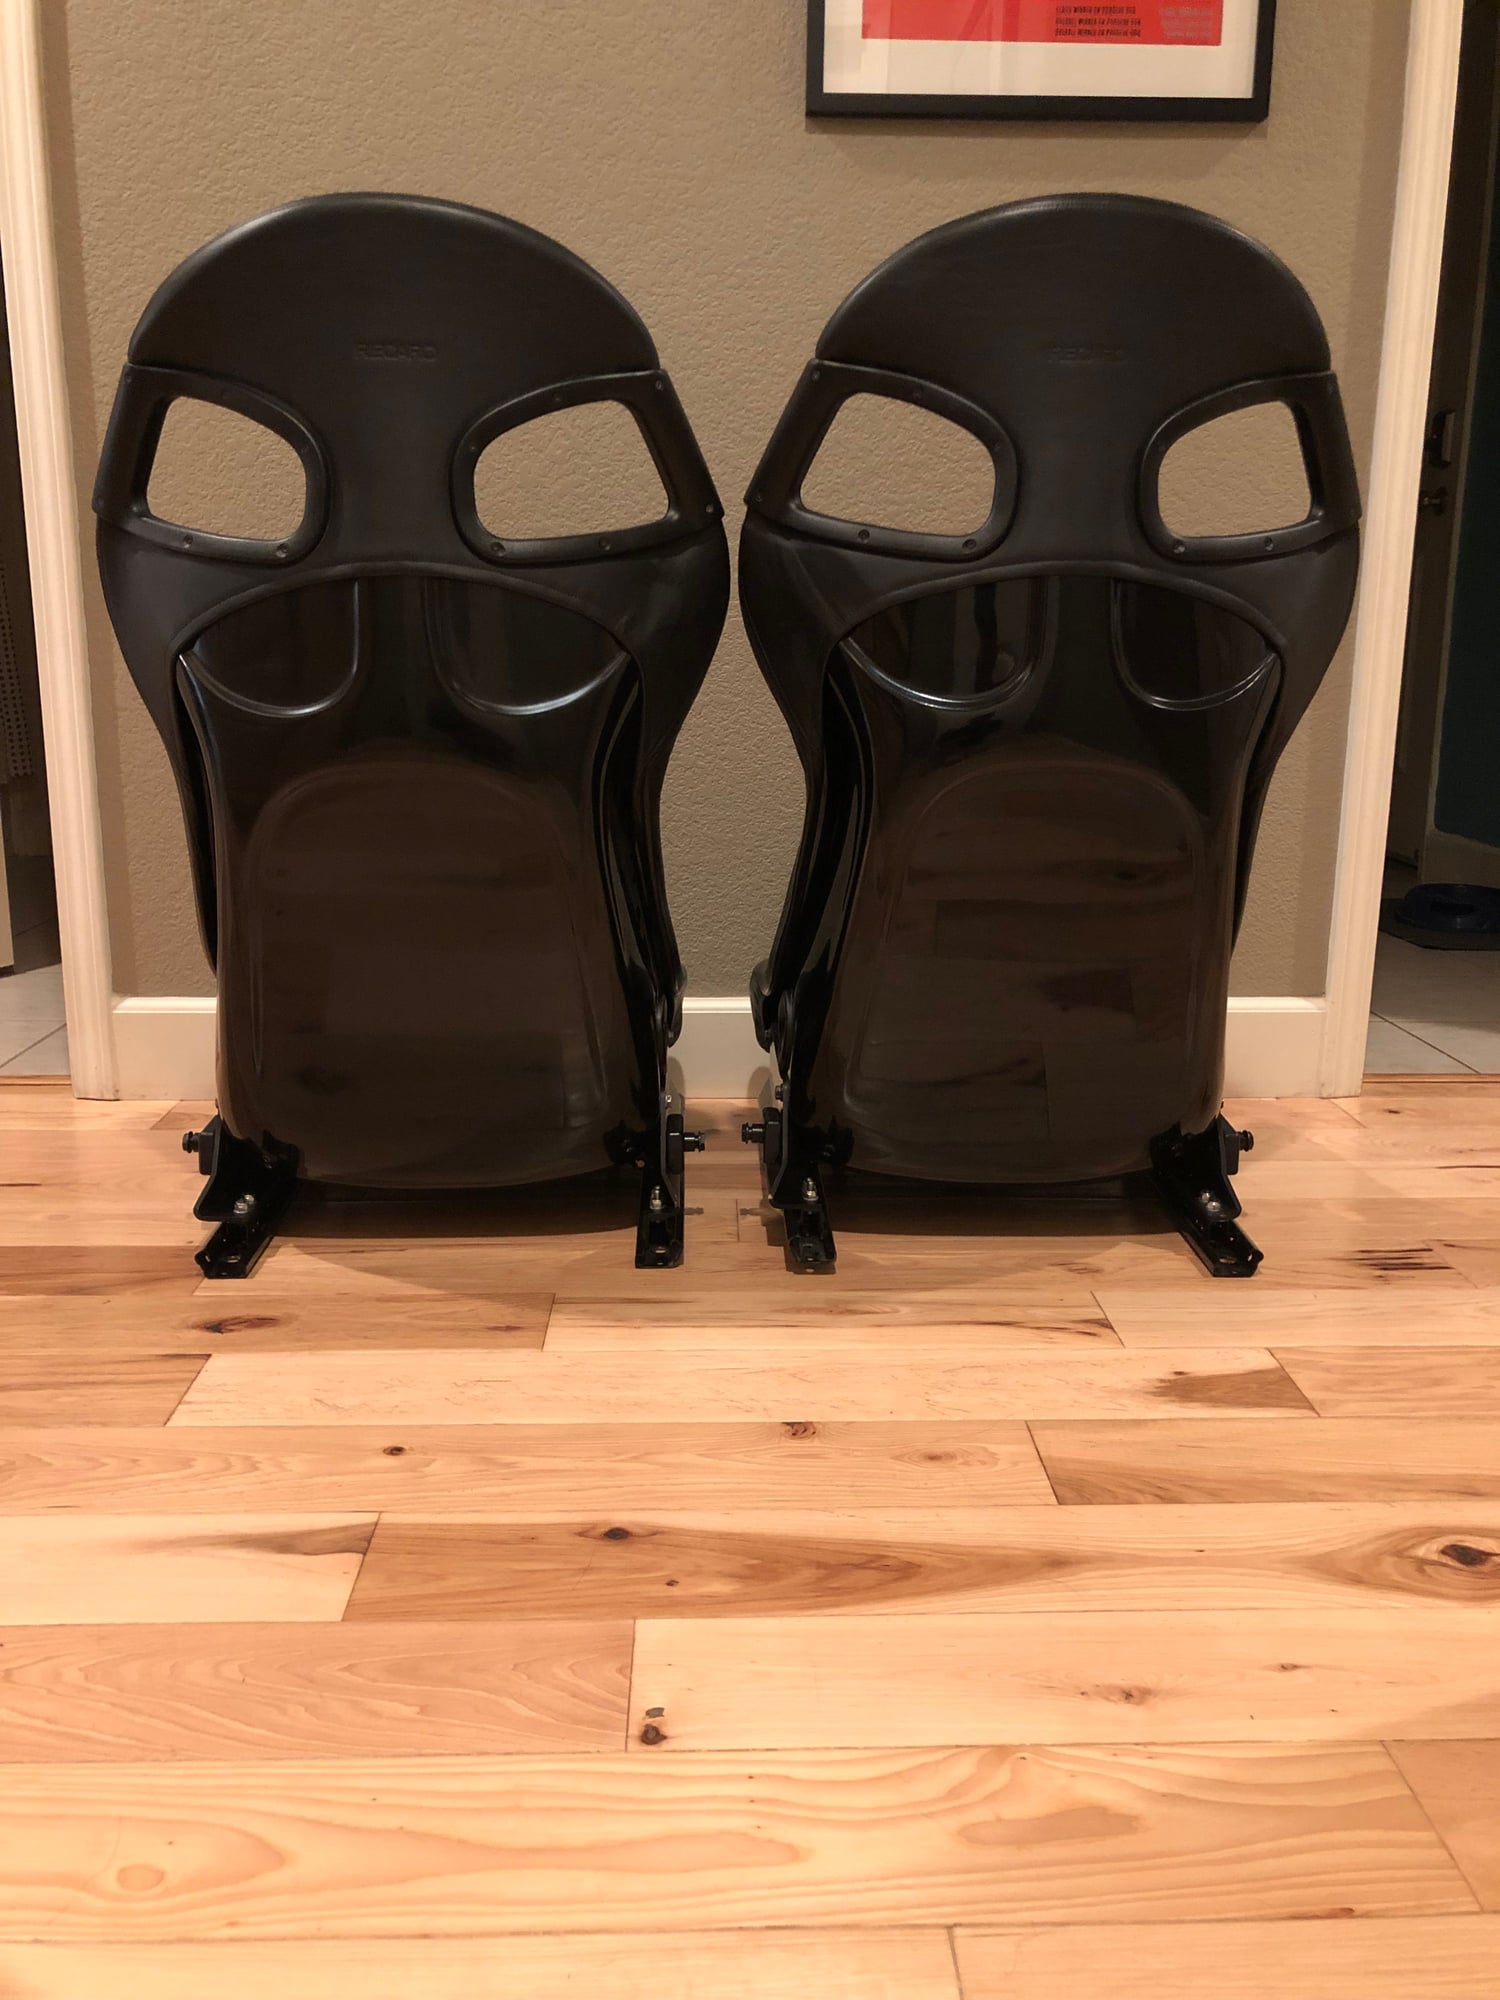 Interior/Upholstery - Recaro GT3 Black Leather Bucket Seats - Used - Livermore, CA 94550, United States